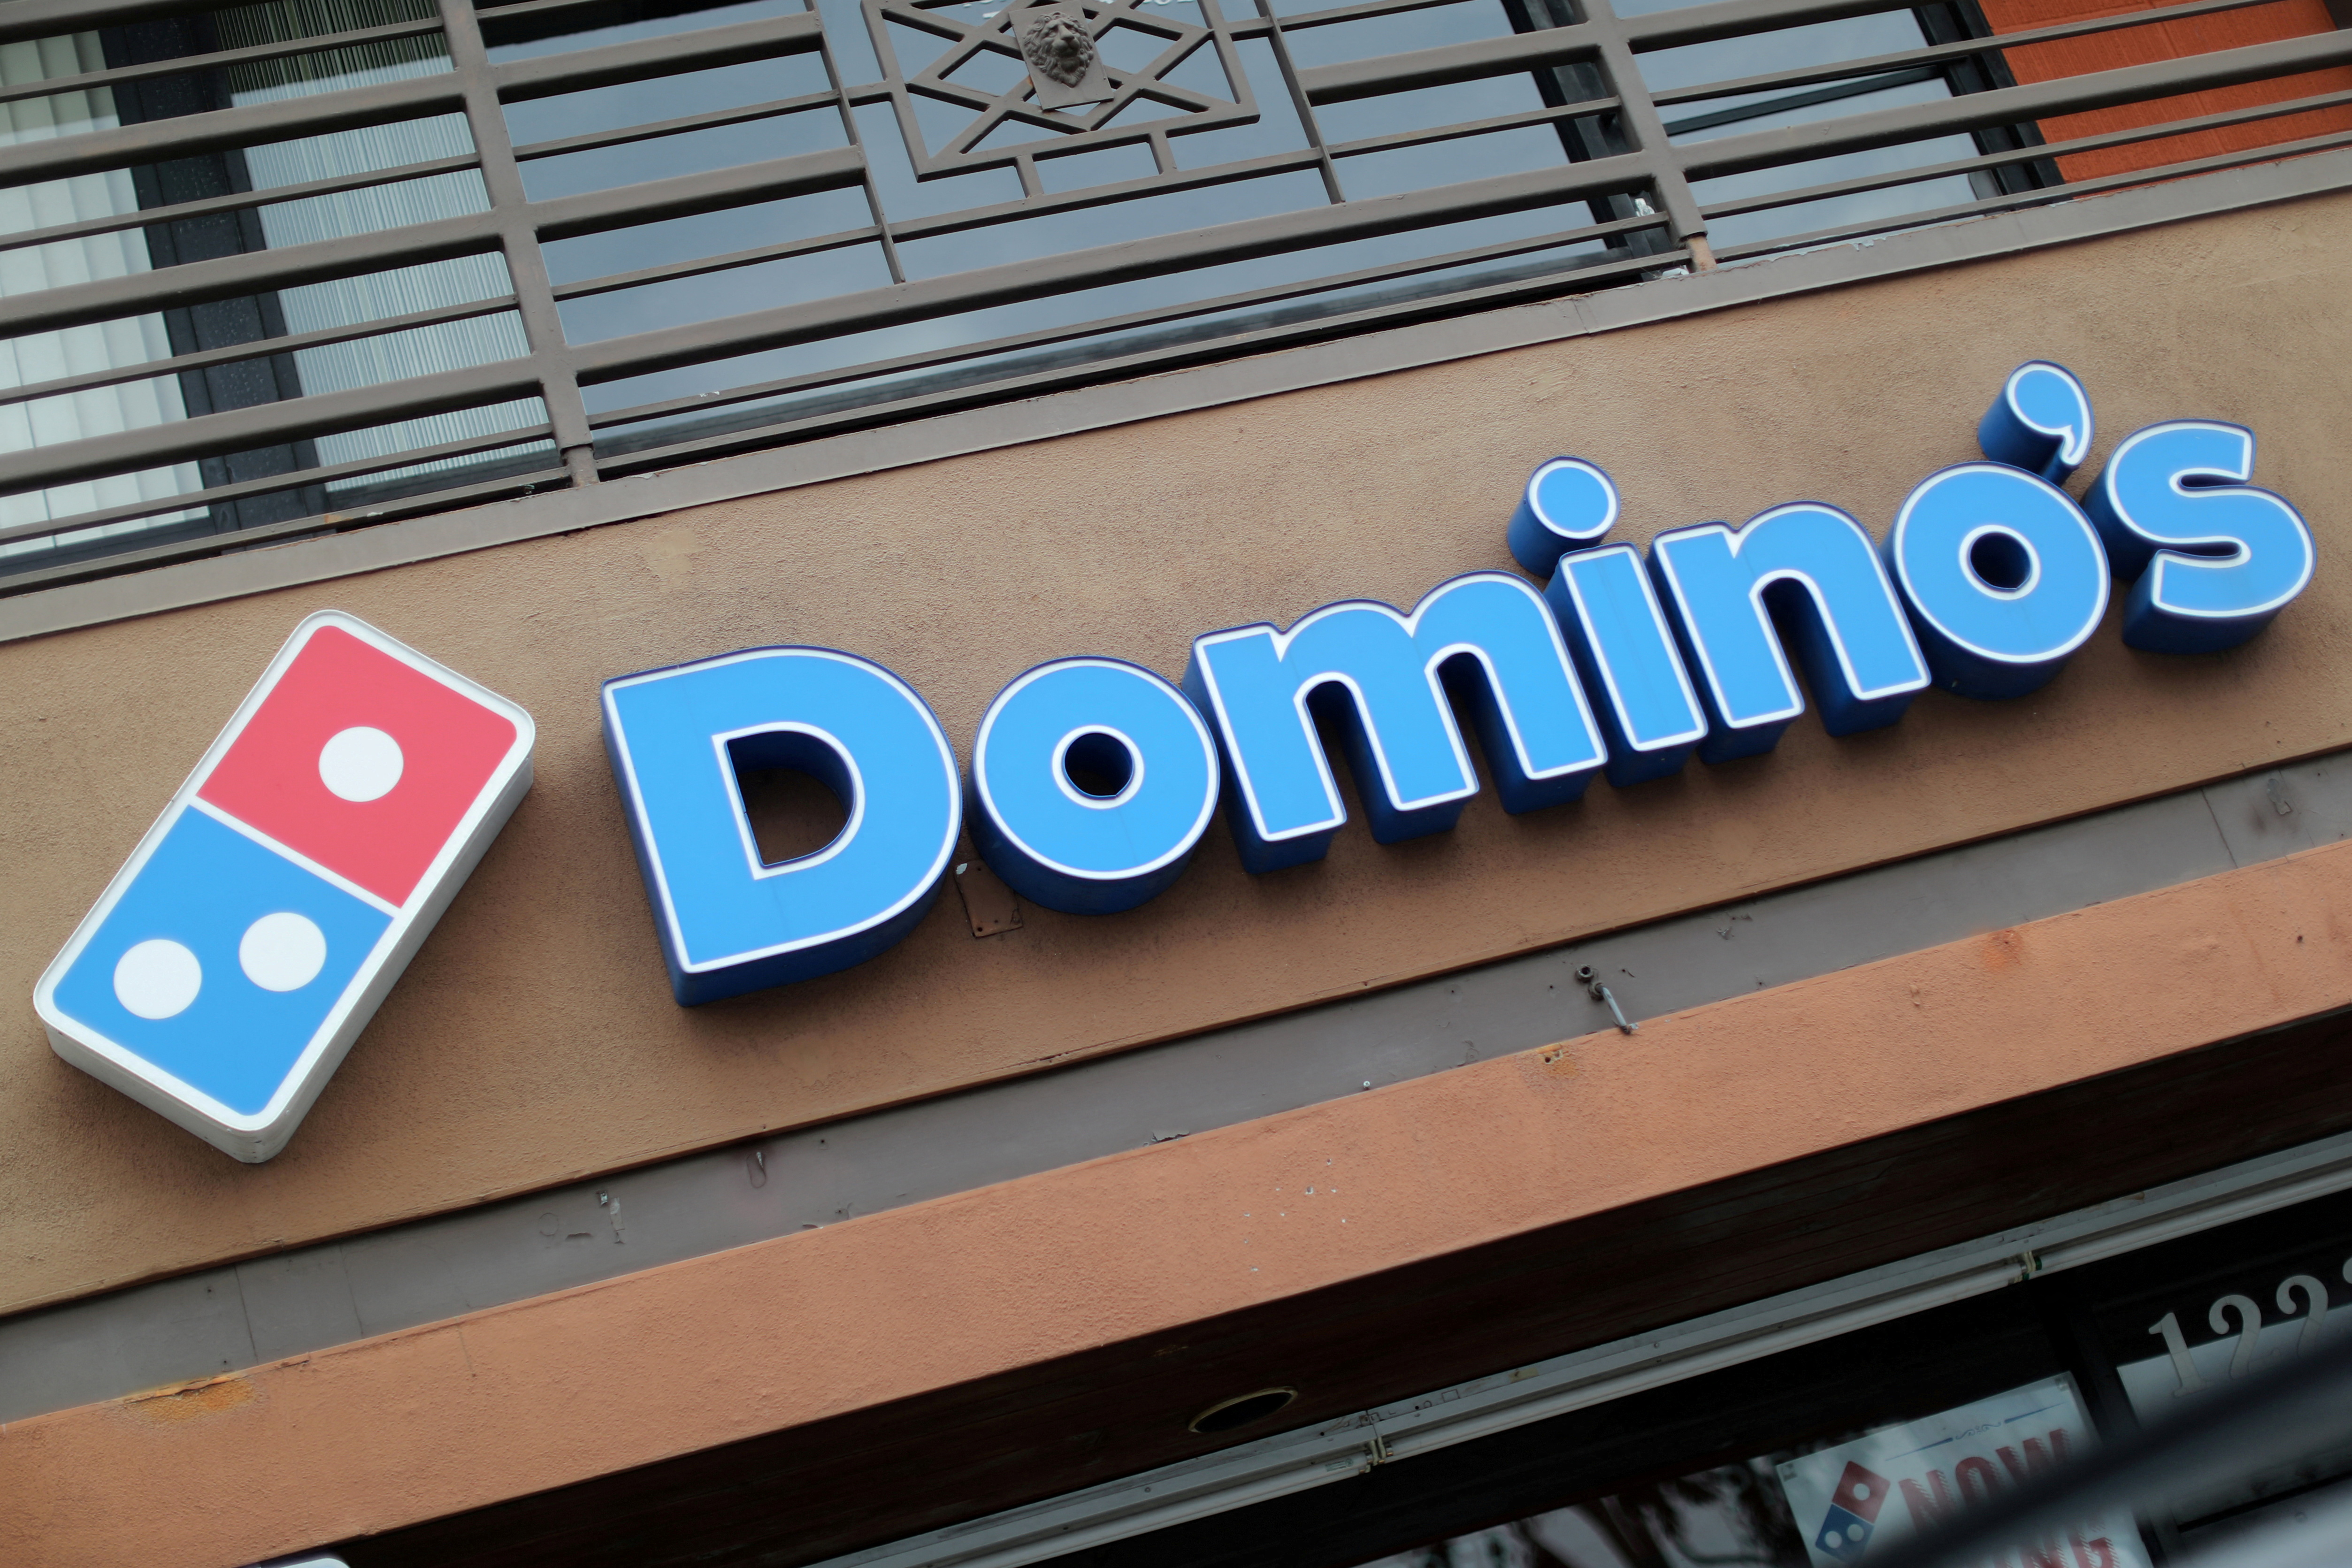 Why did dominos leave south africa?